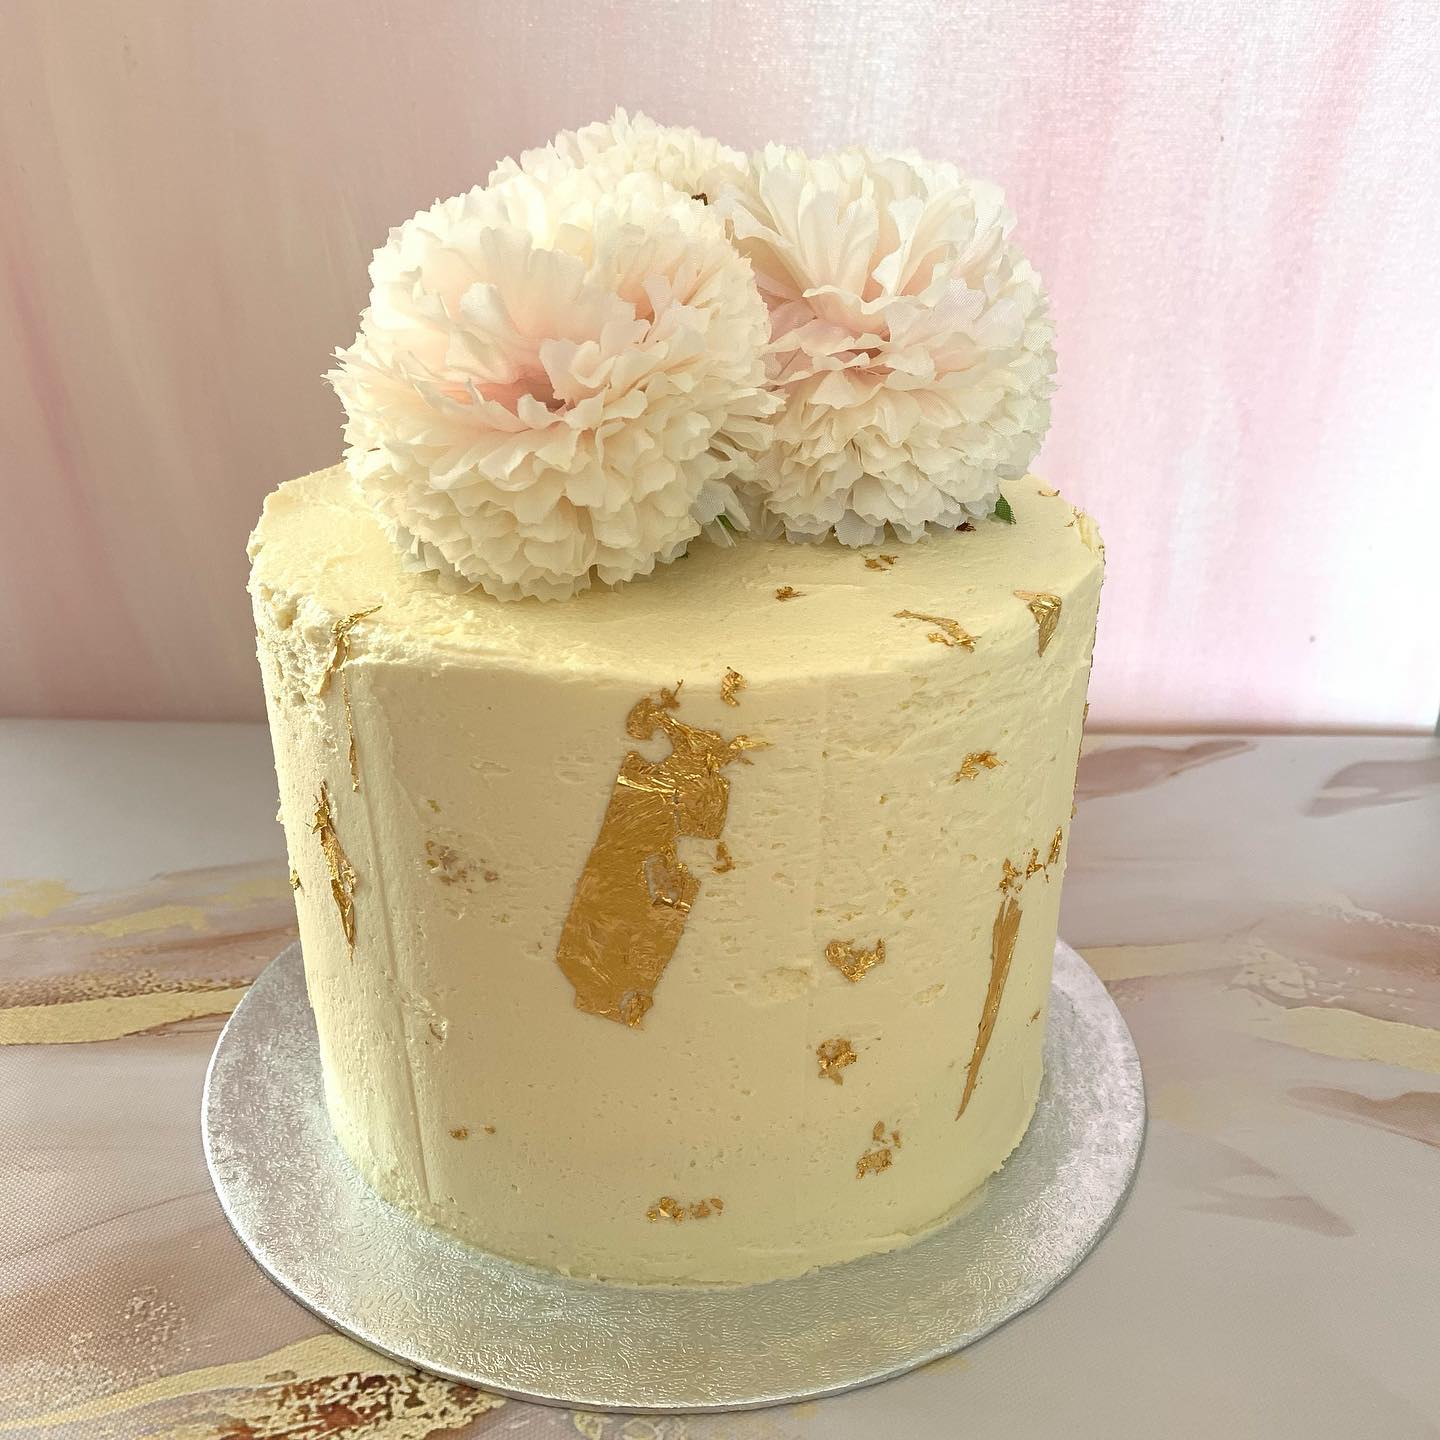 Cake with cream coloured frosting, splashes of gold leaf and faux flowers on top